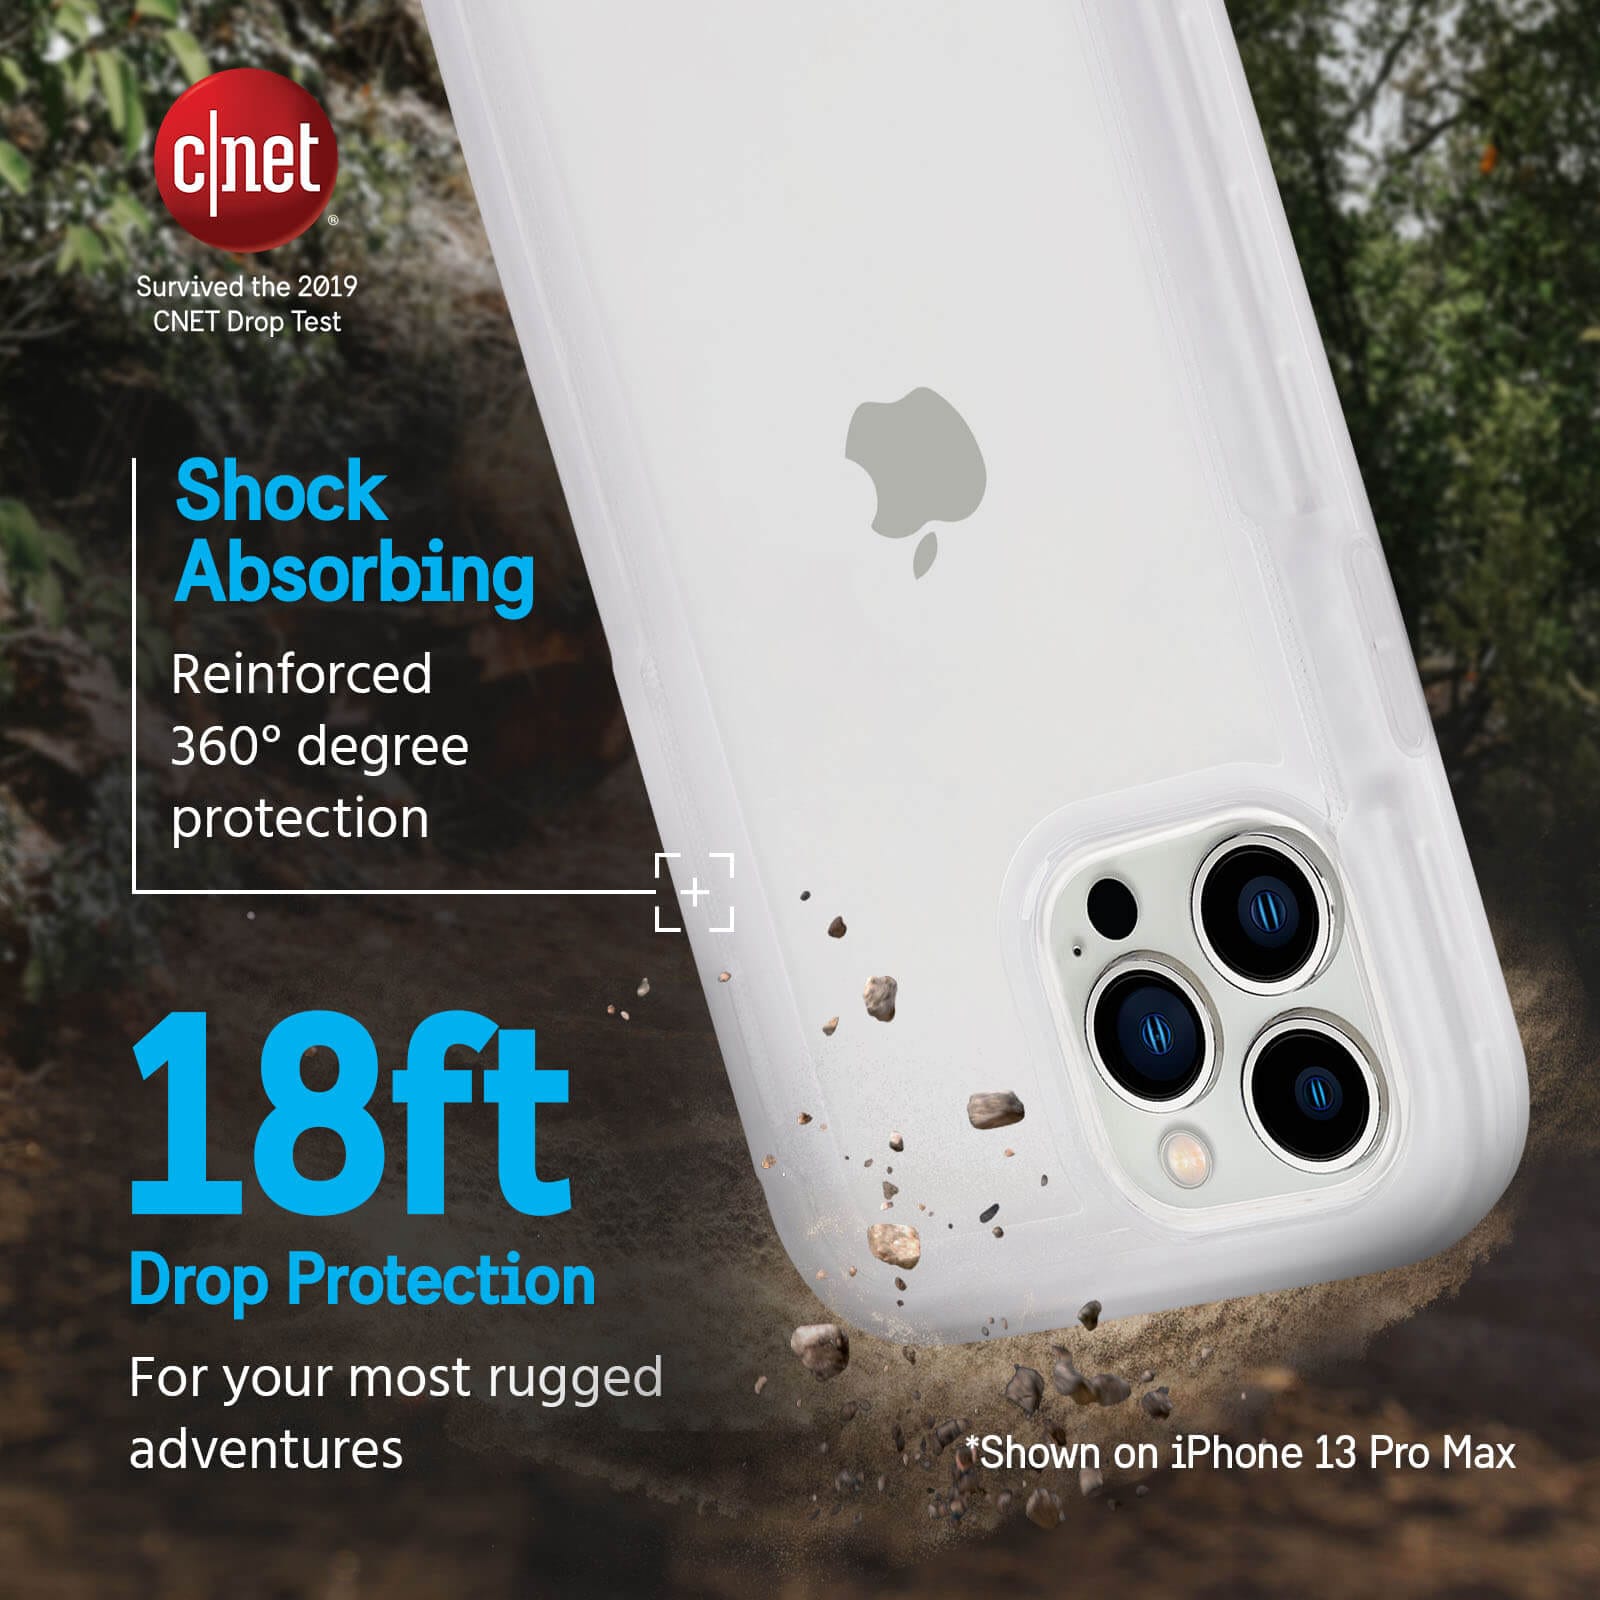 Survived 2019 CNET drop test. Shock absorbing reinforced 360 degree protection. 18ft drop protection for your most rugged adventures, Shown on iPhone 13 Pro Max. color::Clear